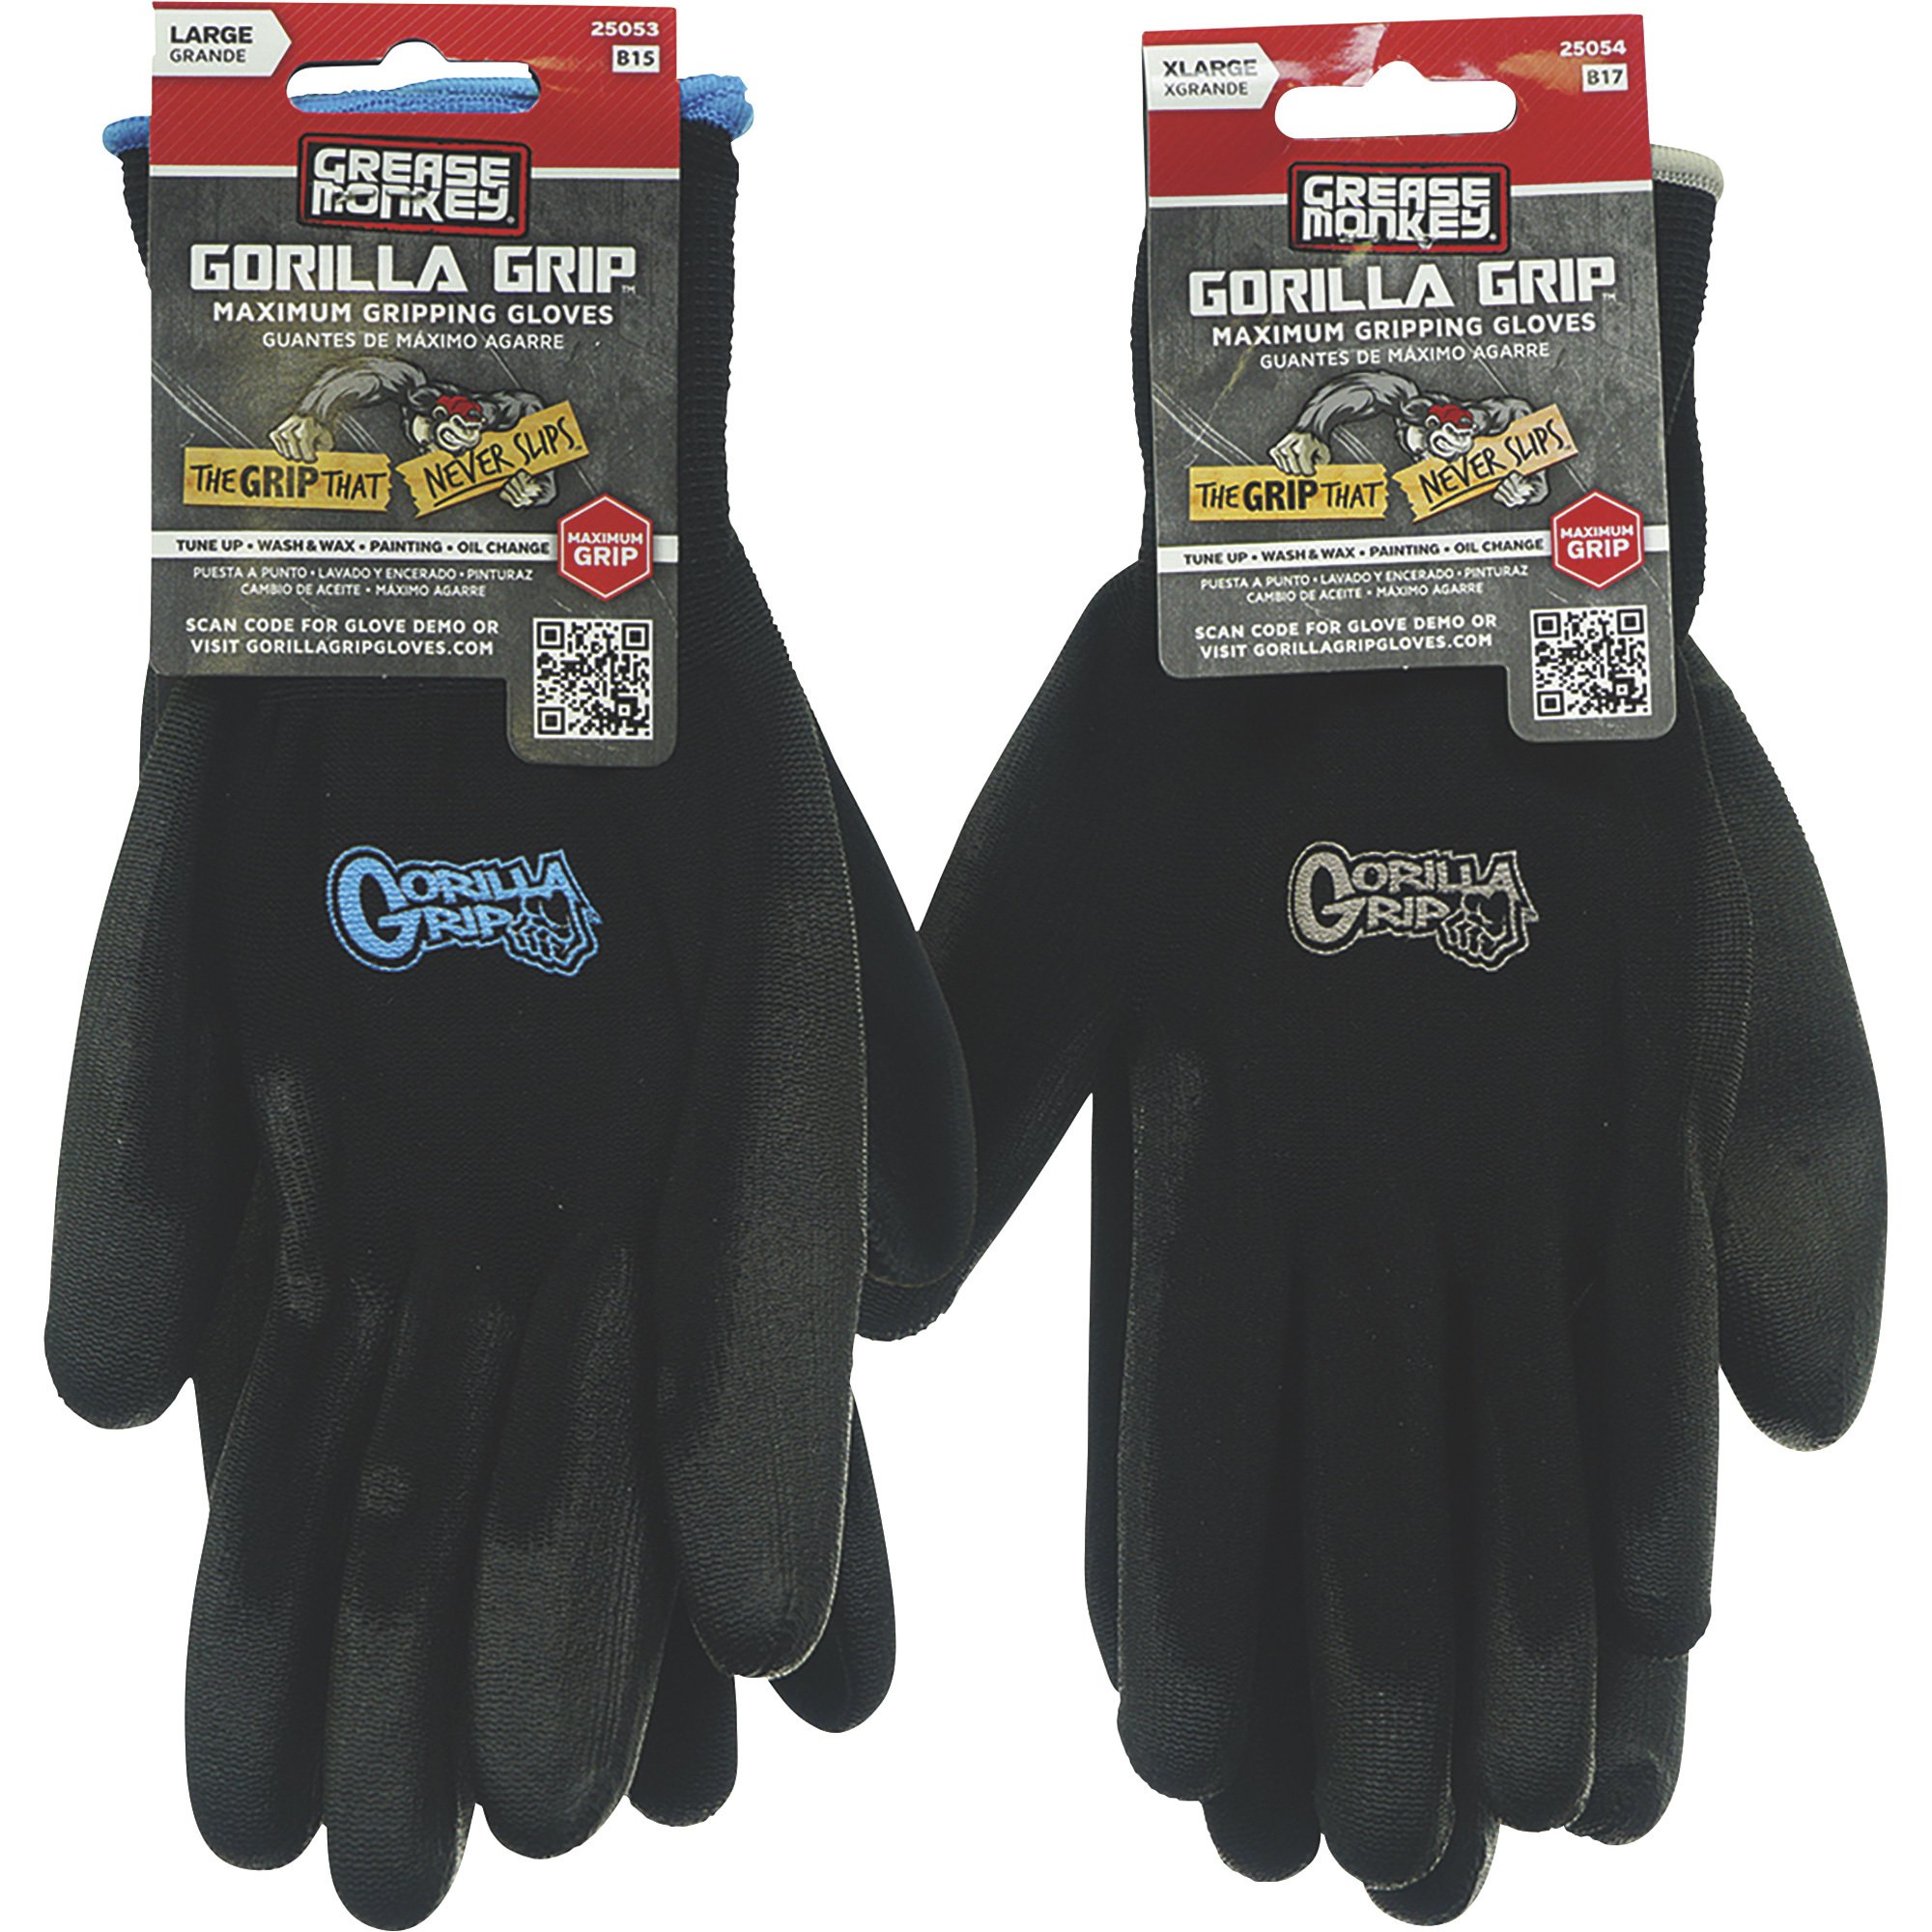 Gorilla Grip Gloves: Hang on Tight When It's Dry, Wet or Oil